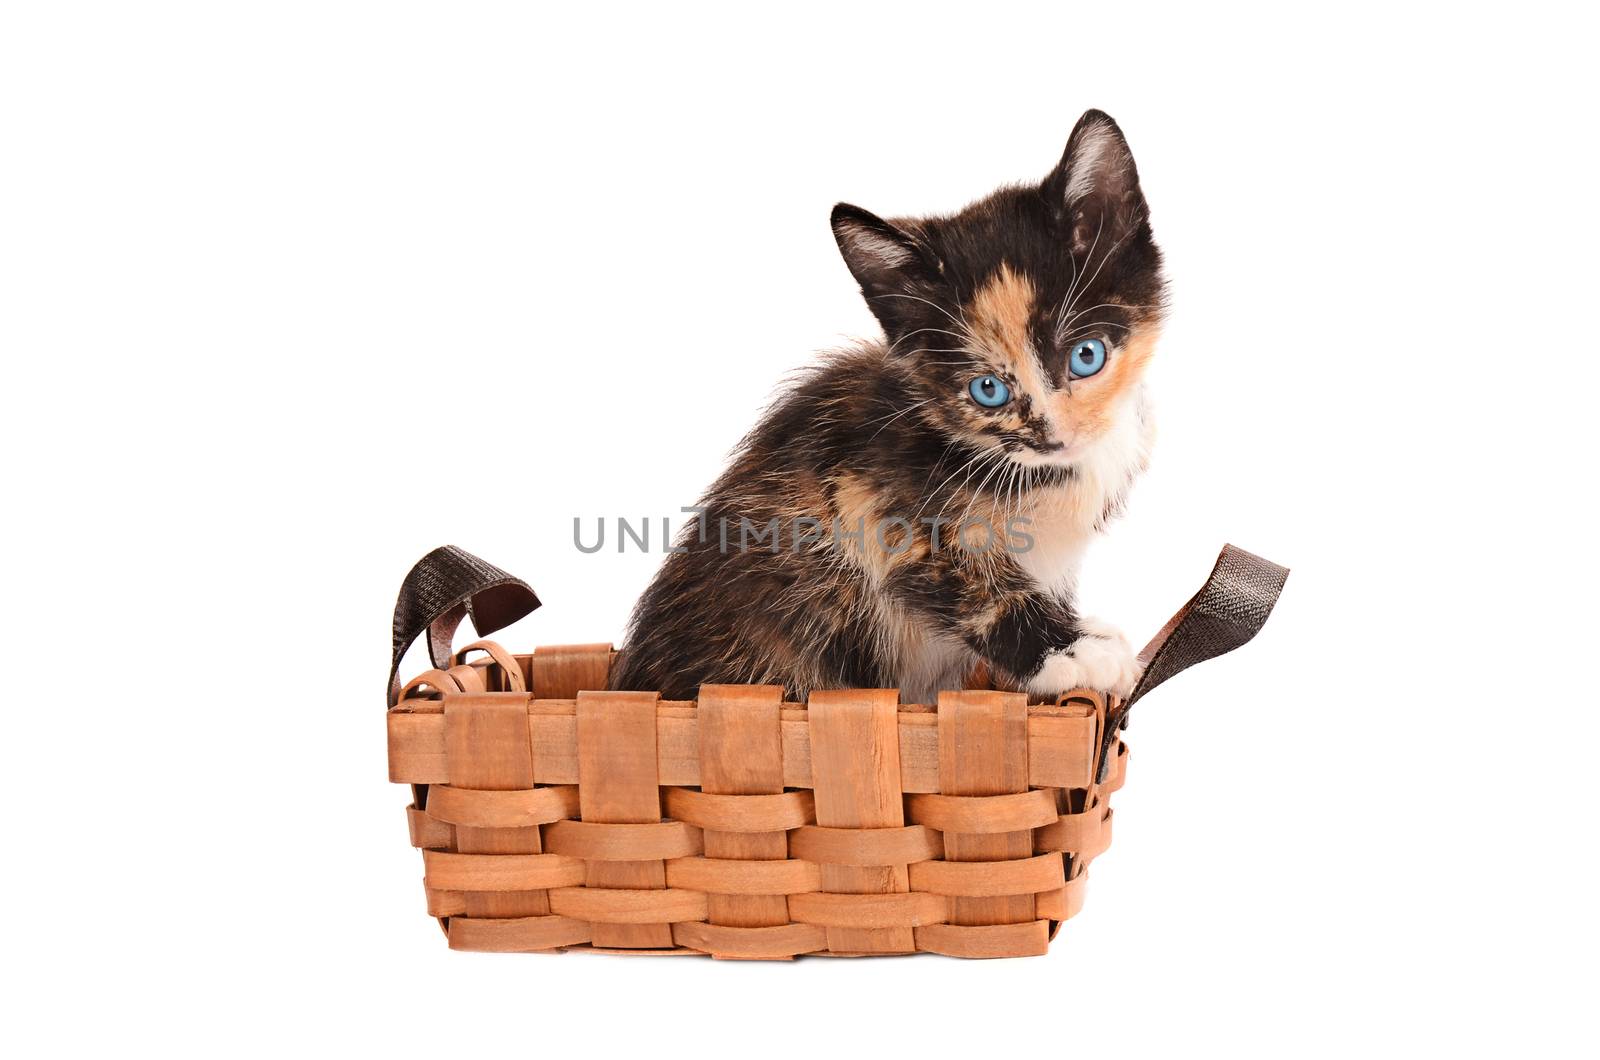 Calico Kitten in a Basket by dnsphotography